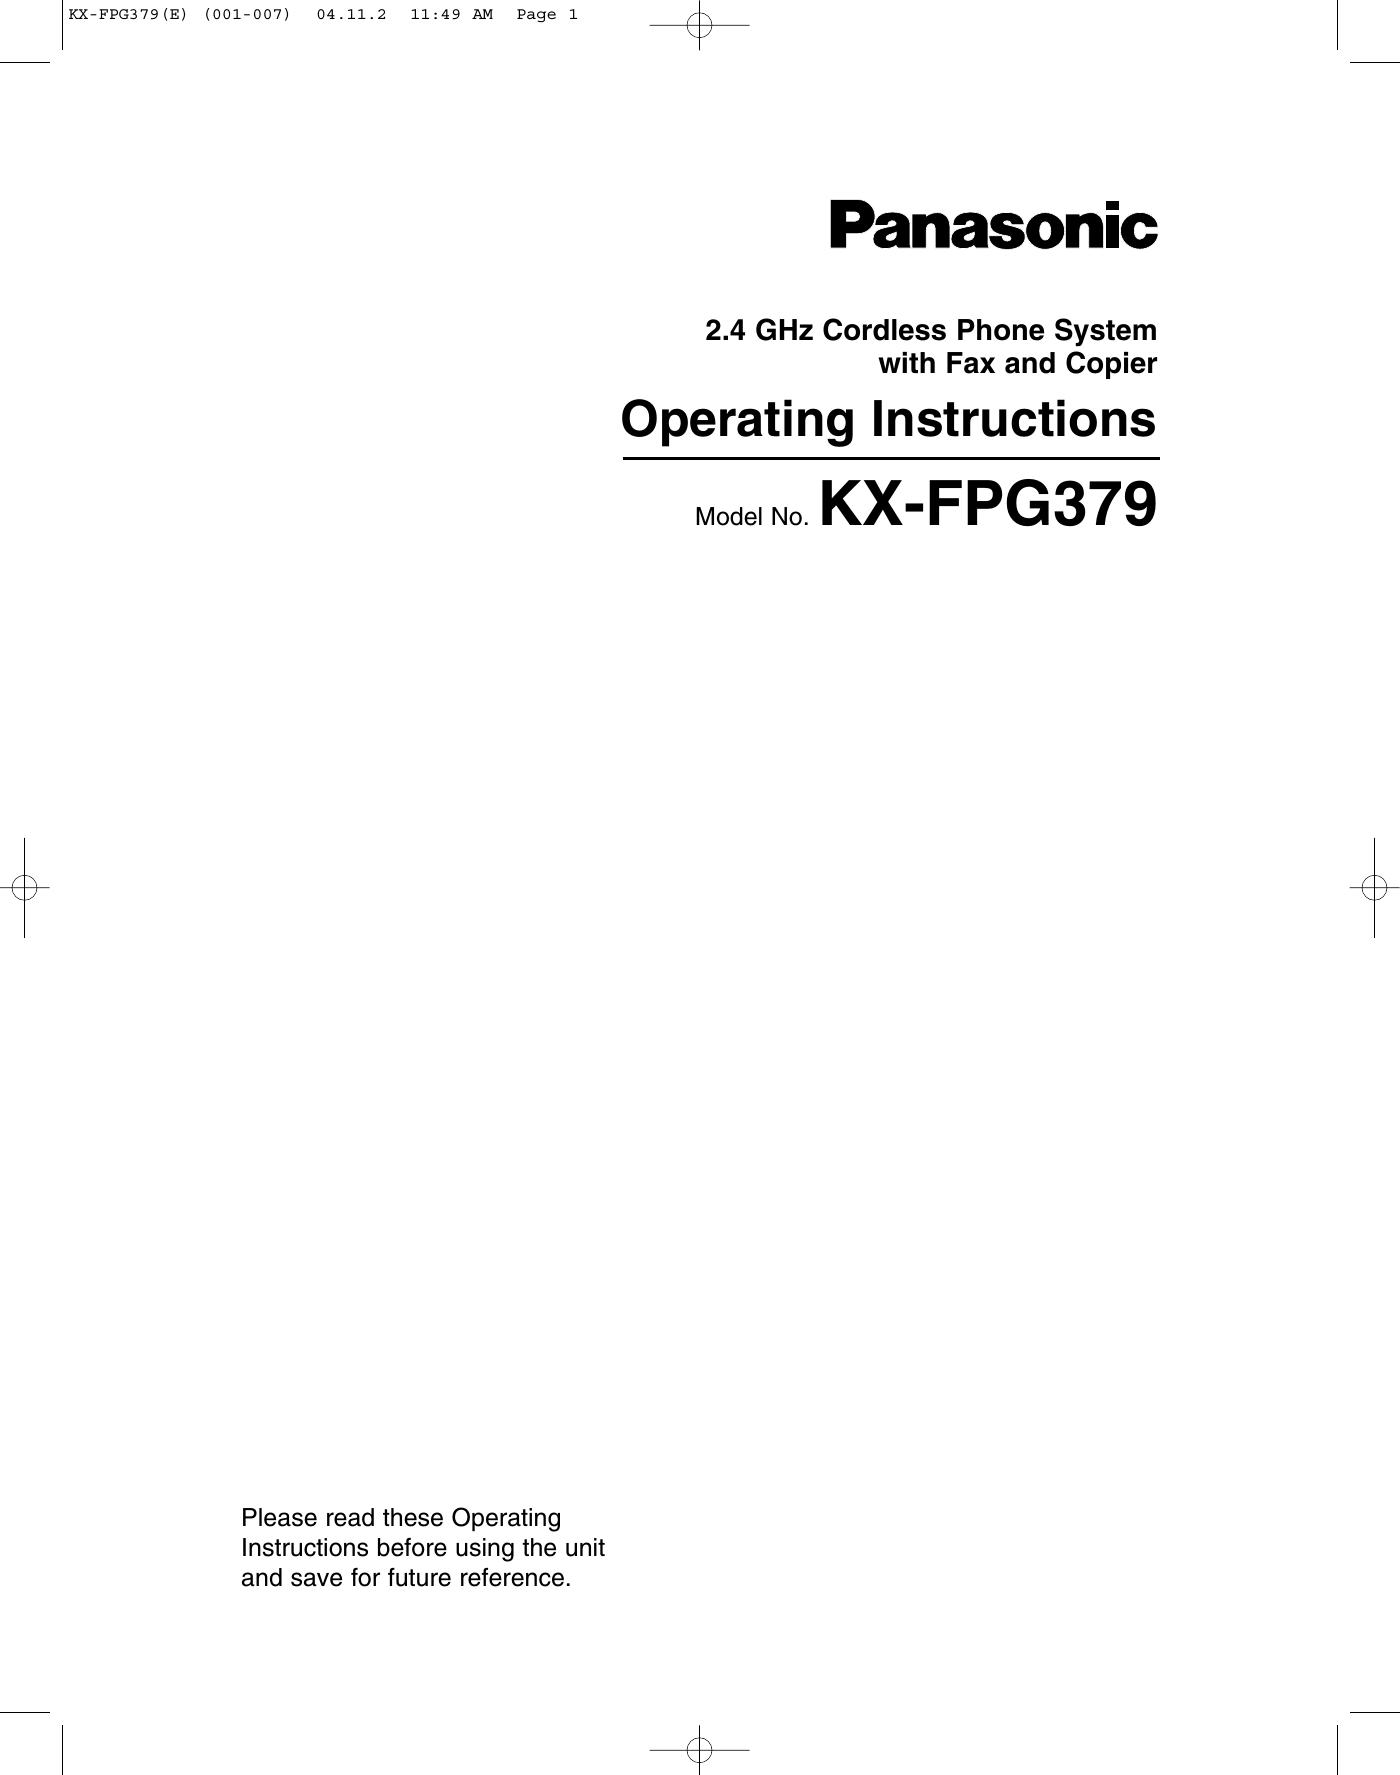 2.4 GHz Cordless Phone System with Fax and CopierOperating InstructionsModel No. KX-FPG379Please read these OperatingInstructions before using the unitand save for future reference.KX-FPG379(E) (001-007)  04.11.2  11:49 AM  Page 1